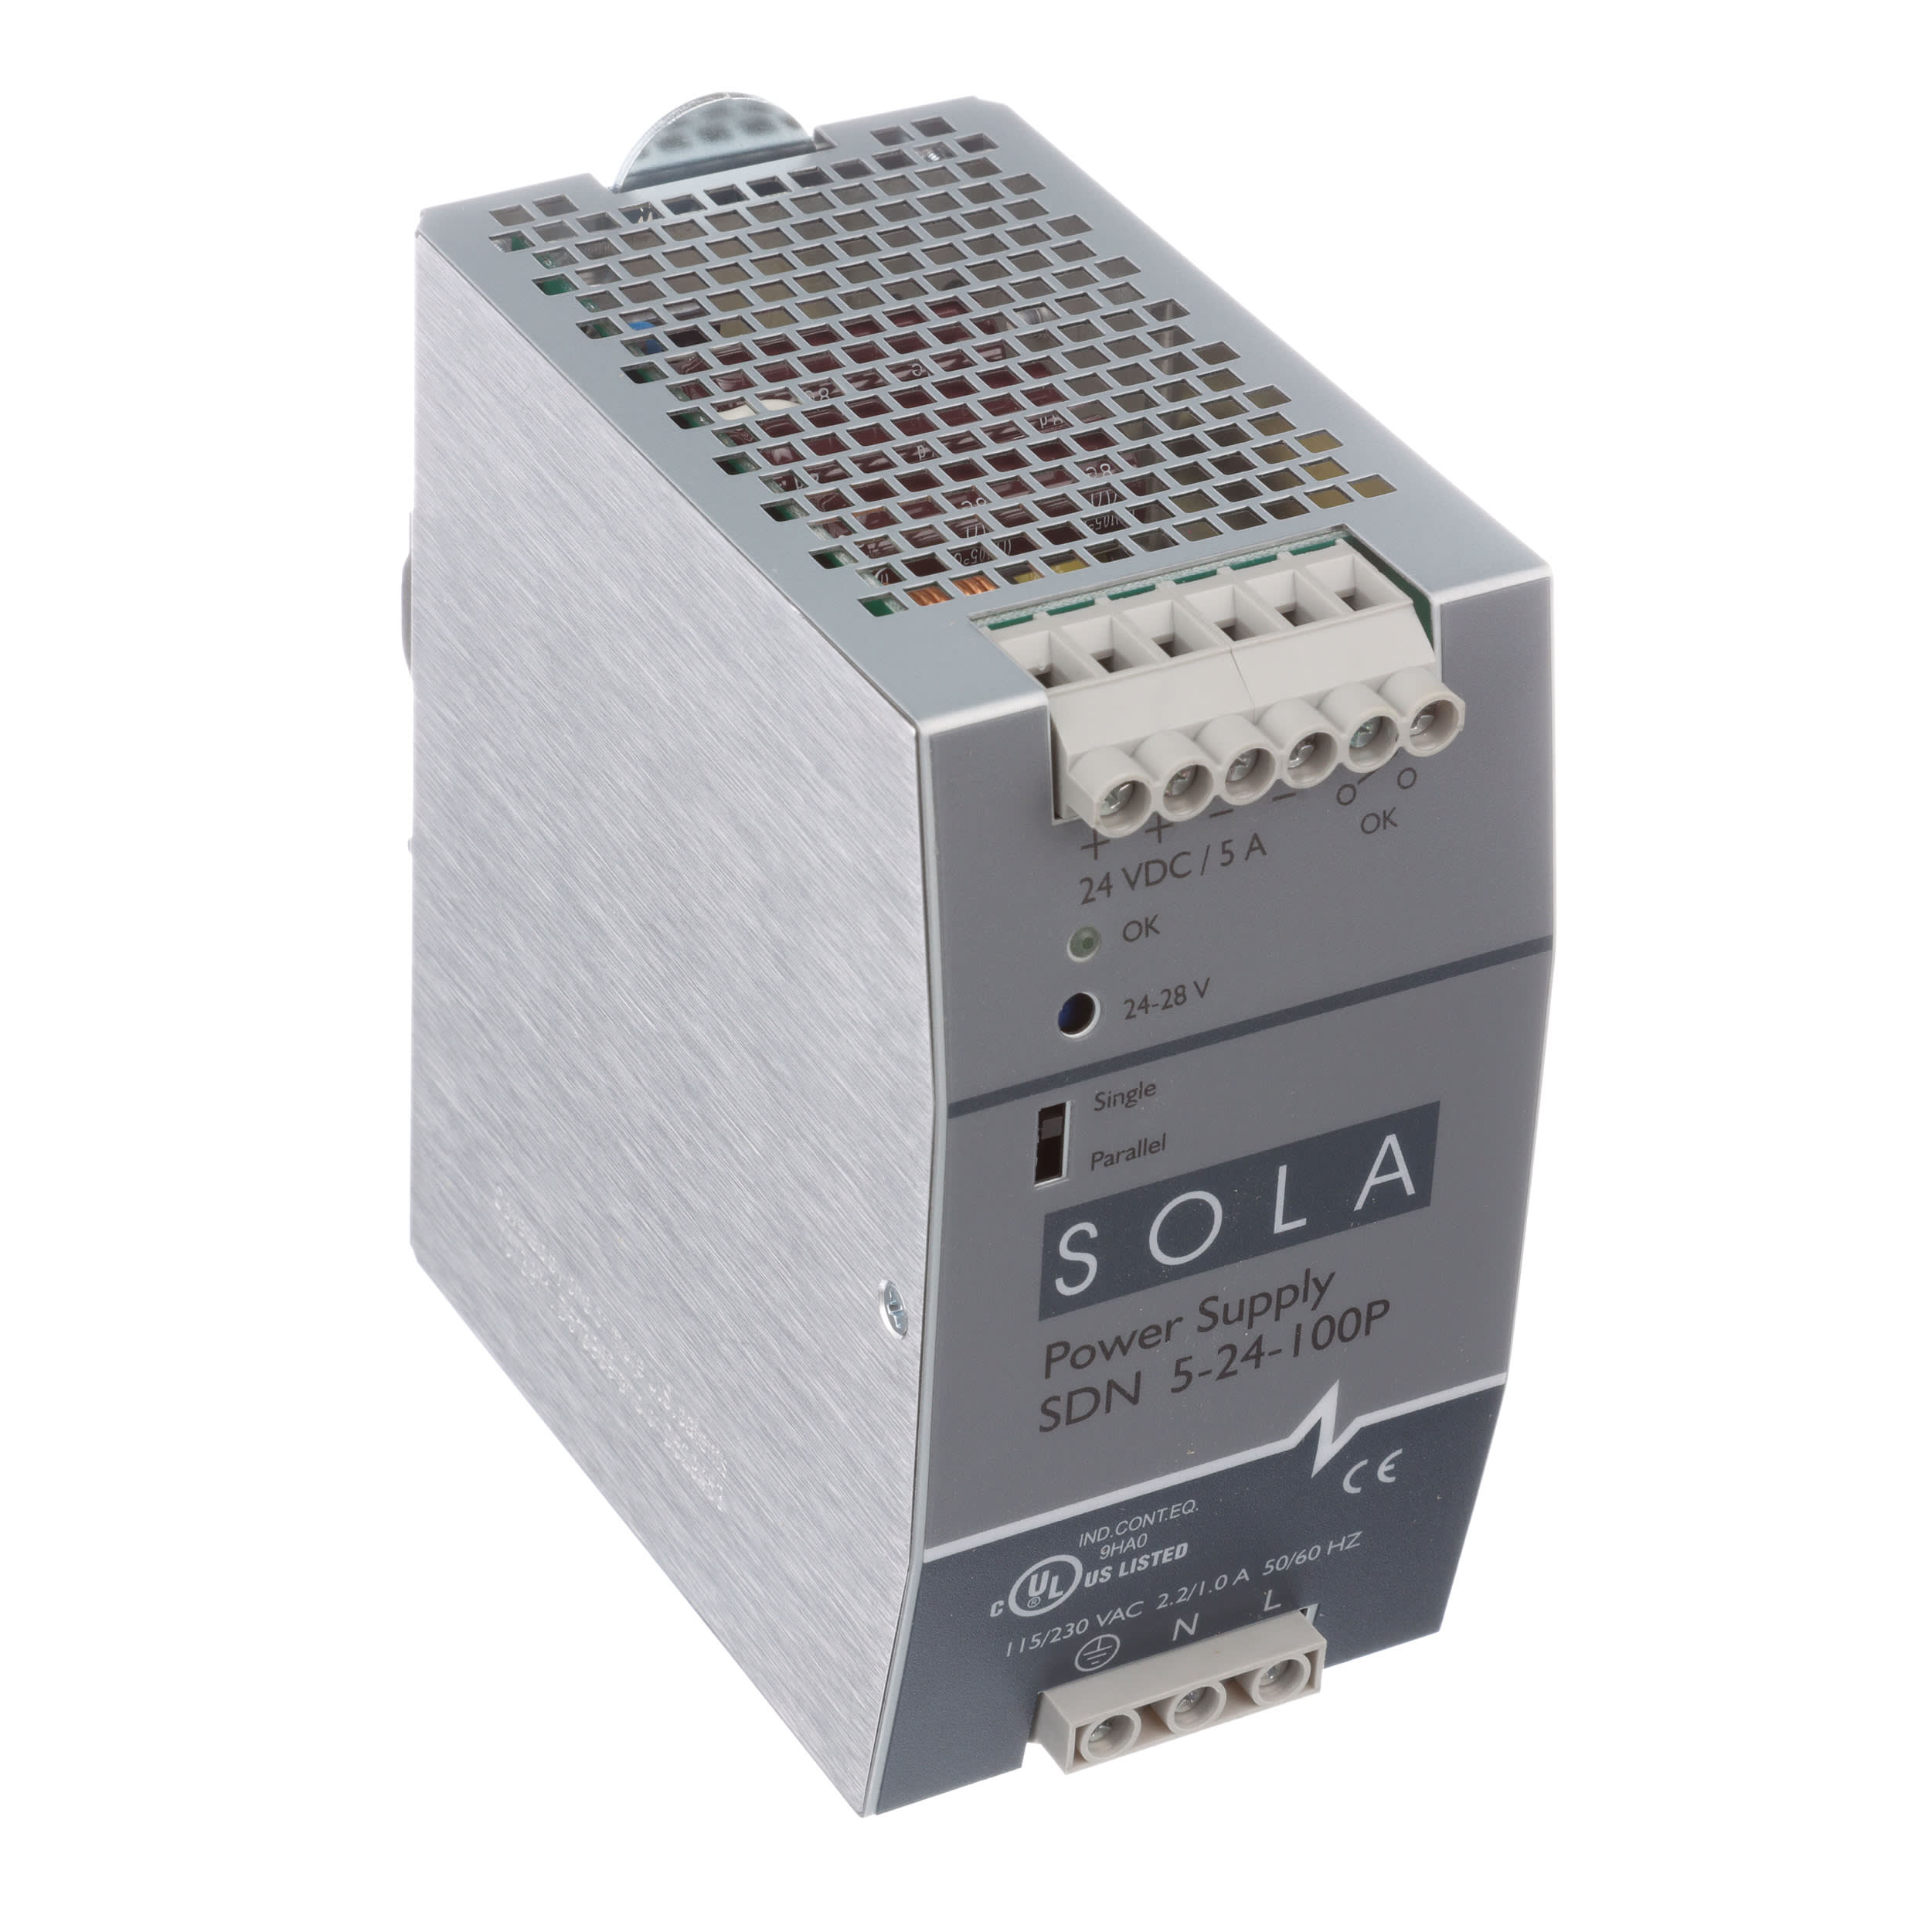 Details about   Emerson SDN 5-24-100C  Sola Power Supply 